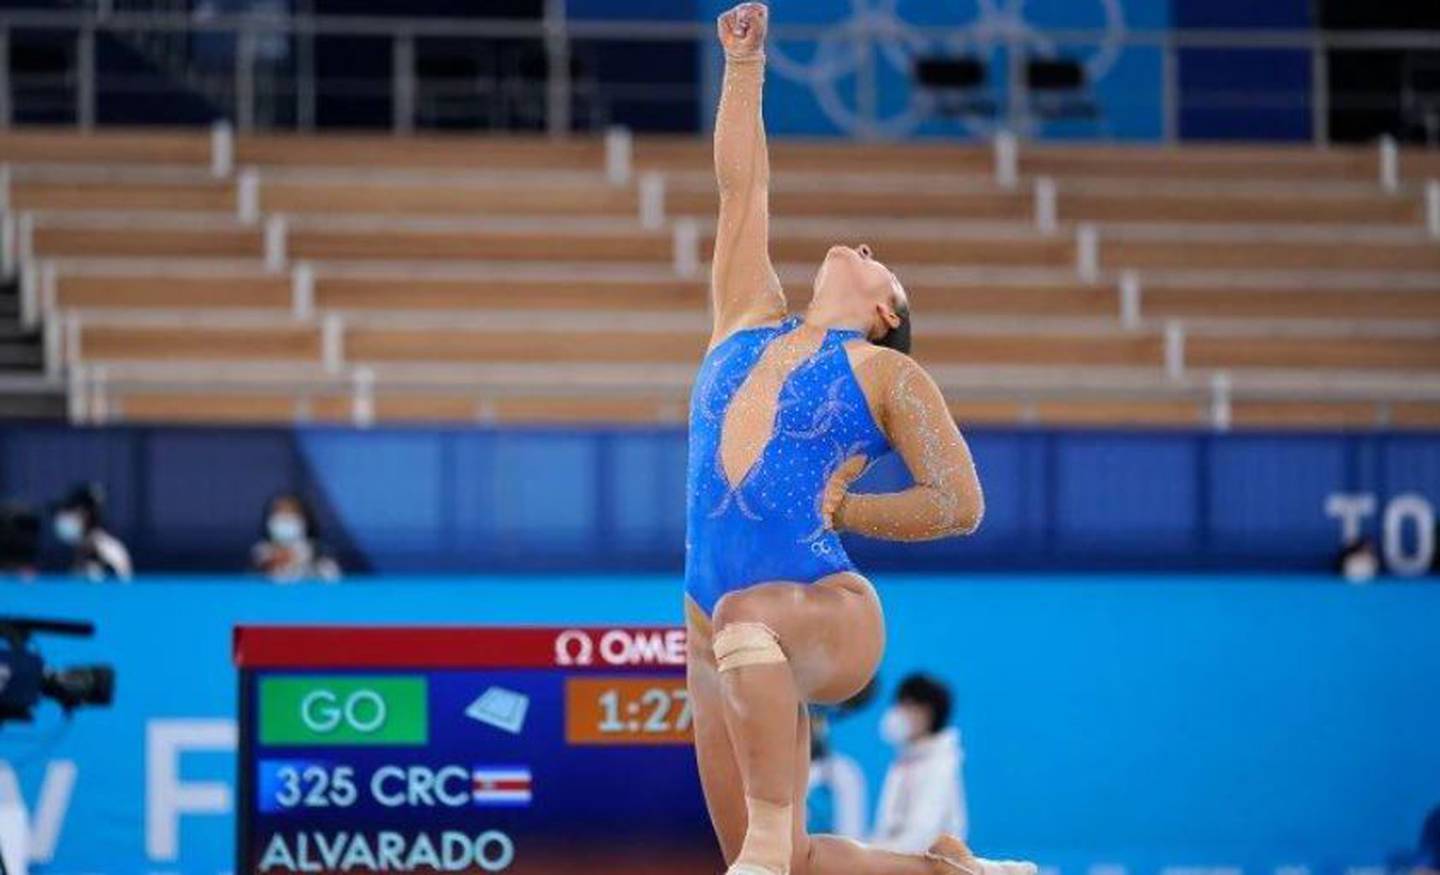 Video: What a load!  Luciana Alvarado debuted in the elite university of the United States